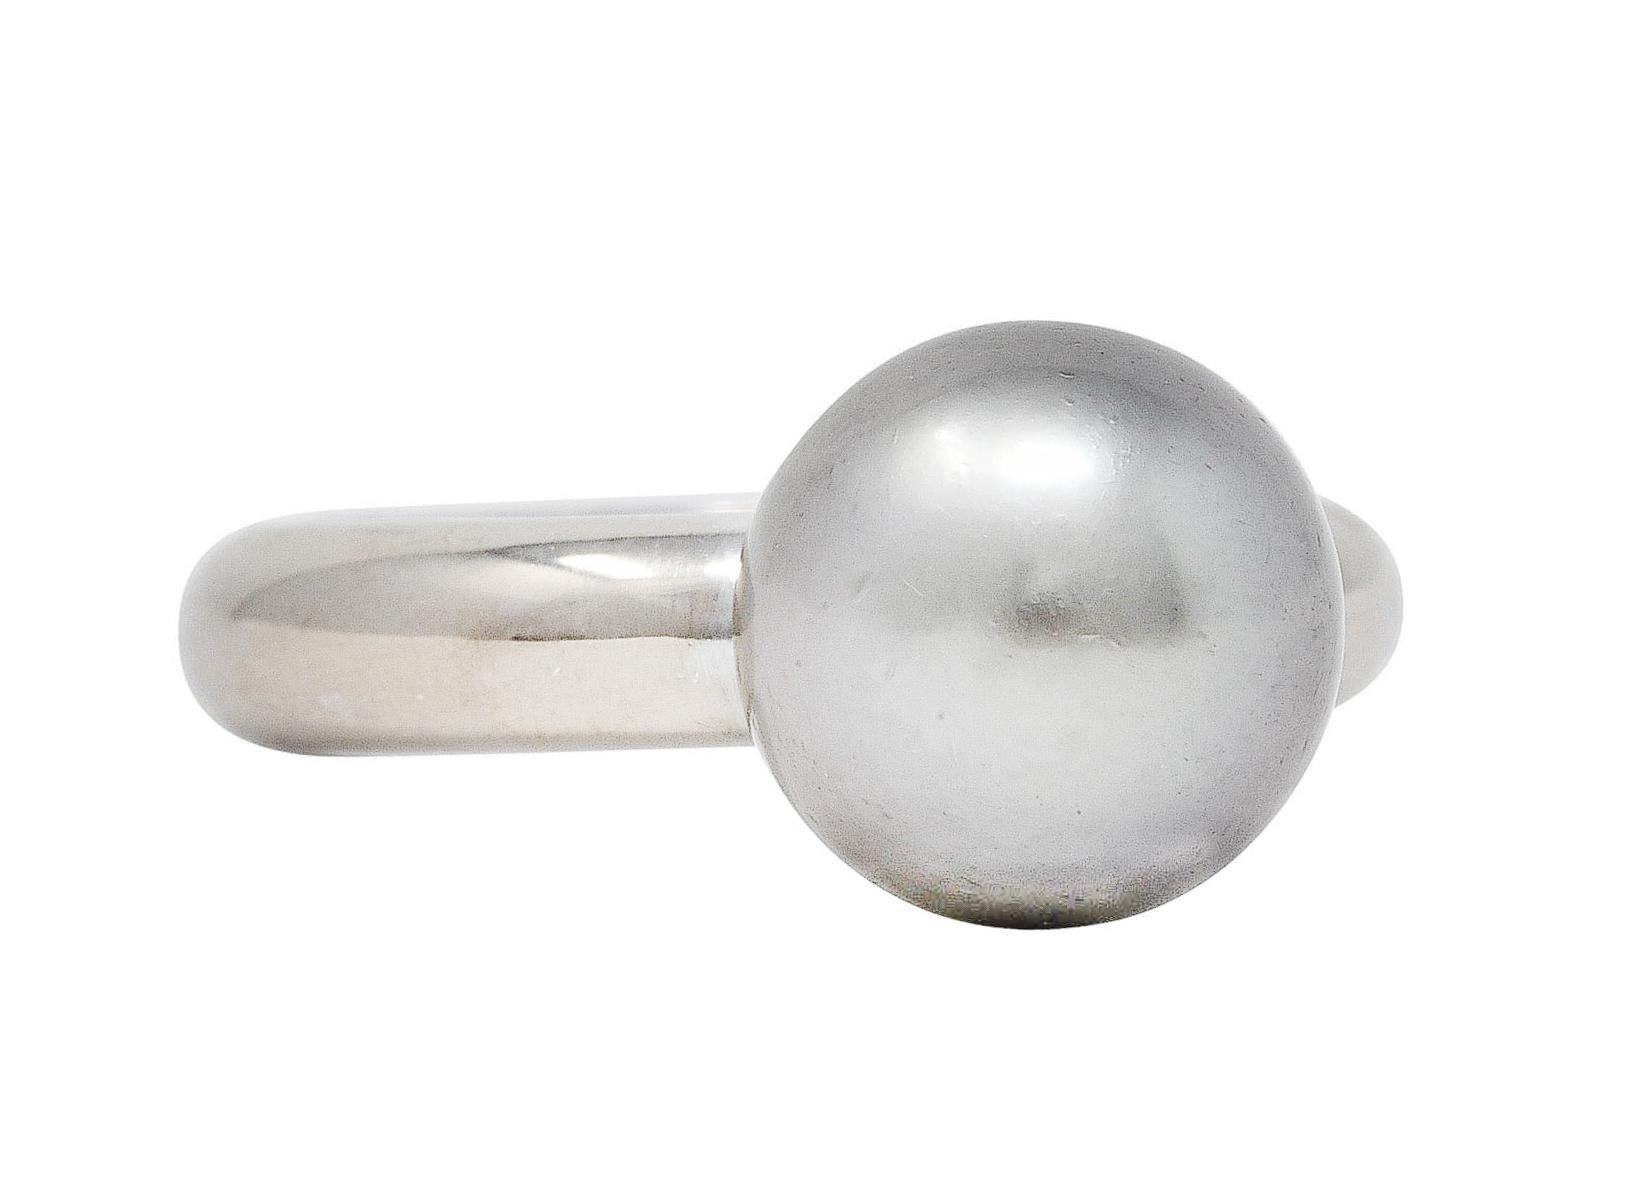 Ring designed as a sleek curved band with single pearl

Pearl is 10.0 mm round - Tahitian South Sea in origin 

Dark grey in body color with strong rosè overtones and very good luster

Stamped 750 for 18 karat white gold 

Fully signed Cartier